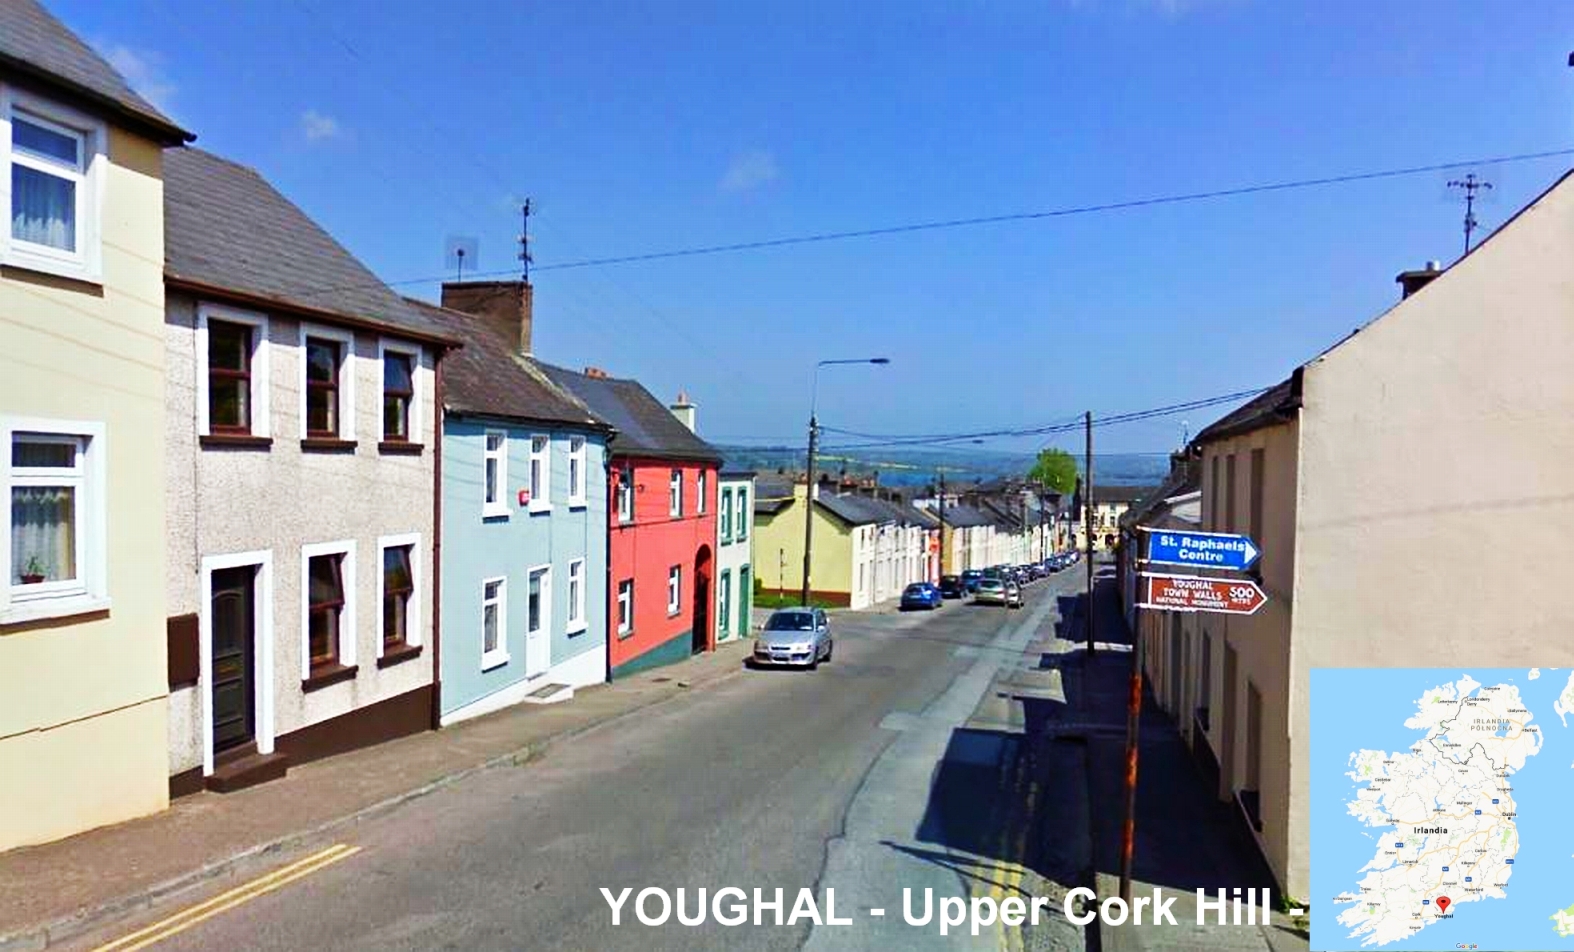 Youghal Upper Cork Hill